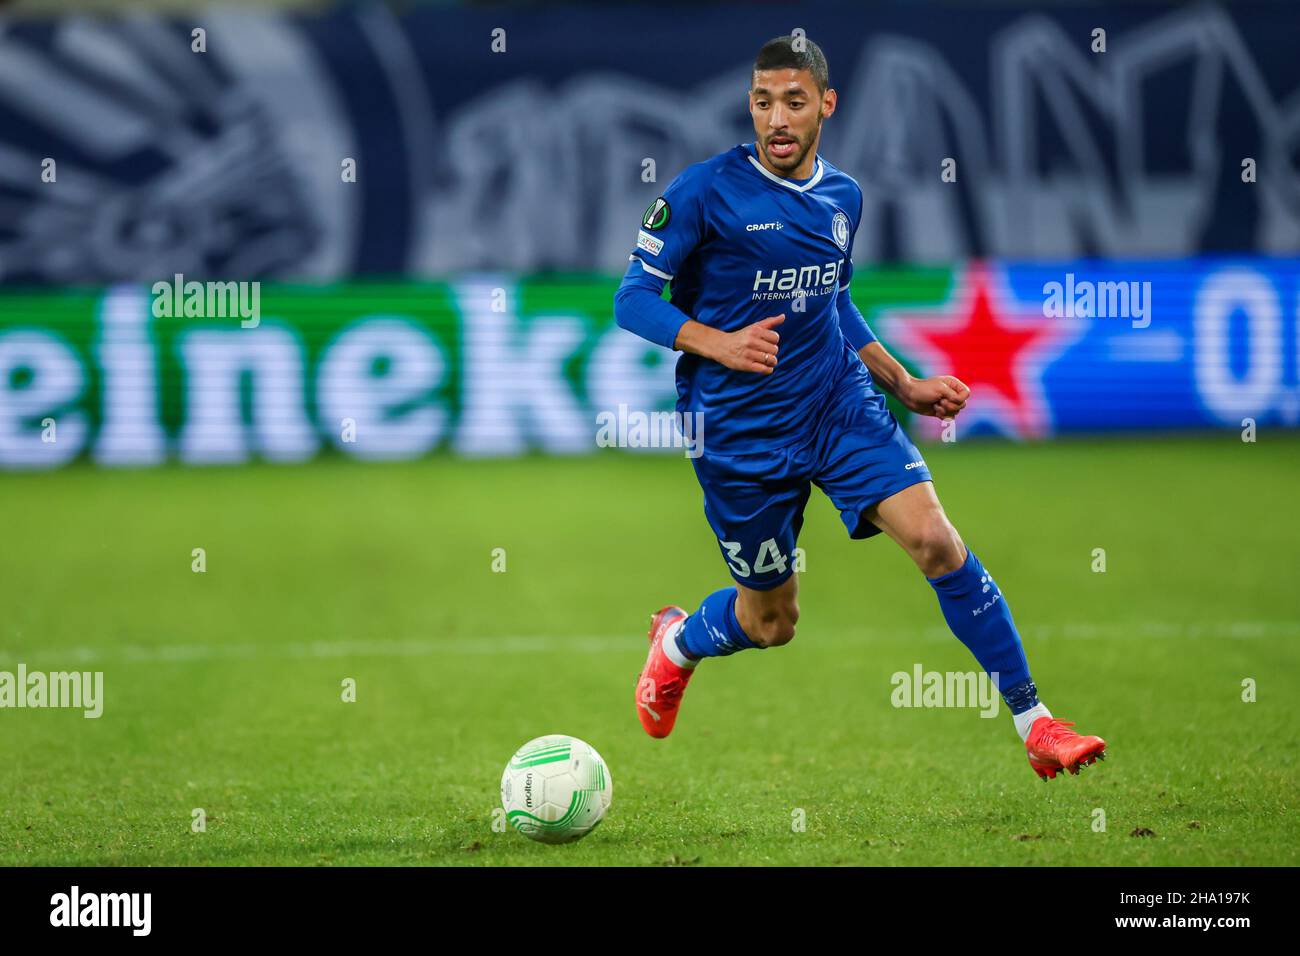 GENT, BELGIUM - JANUARY 9: Tarik Tissoudali of KAA Gent during the UEFA Europa Conference League Group stage match between KAA Gent and FC Flora Tallinn at Ghelamco Arena on January 9, 2021 in Gent, Belgium (Photo by Geert van Erven/Orange Pictures) Stock Photo